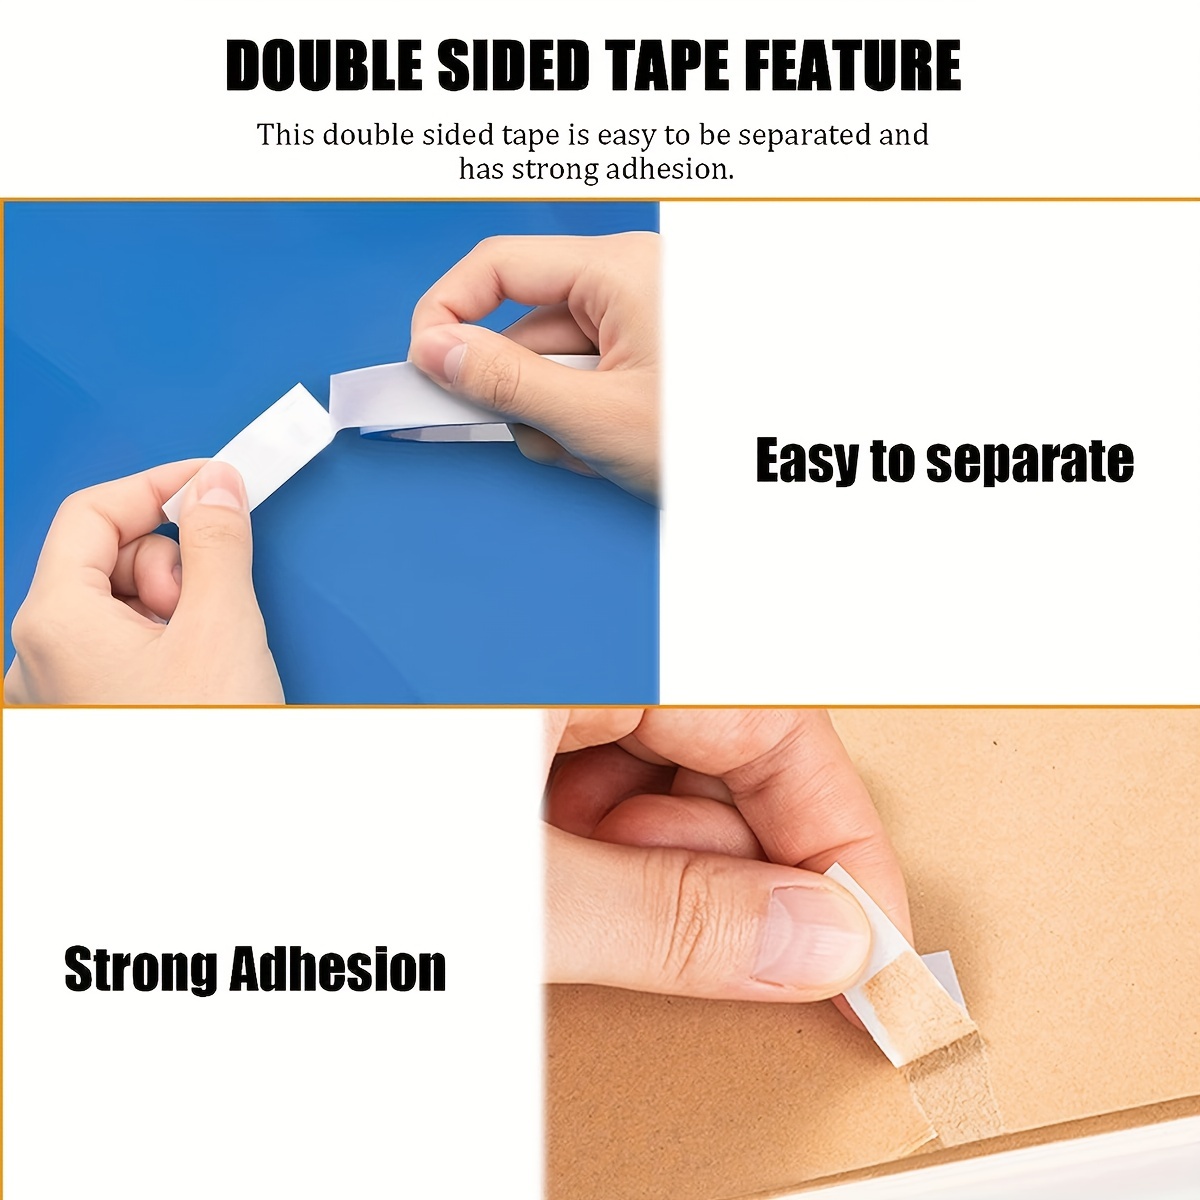 Adhesive Sheets Double Sided Scrapbooking Tapes